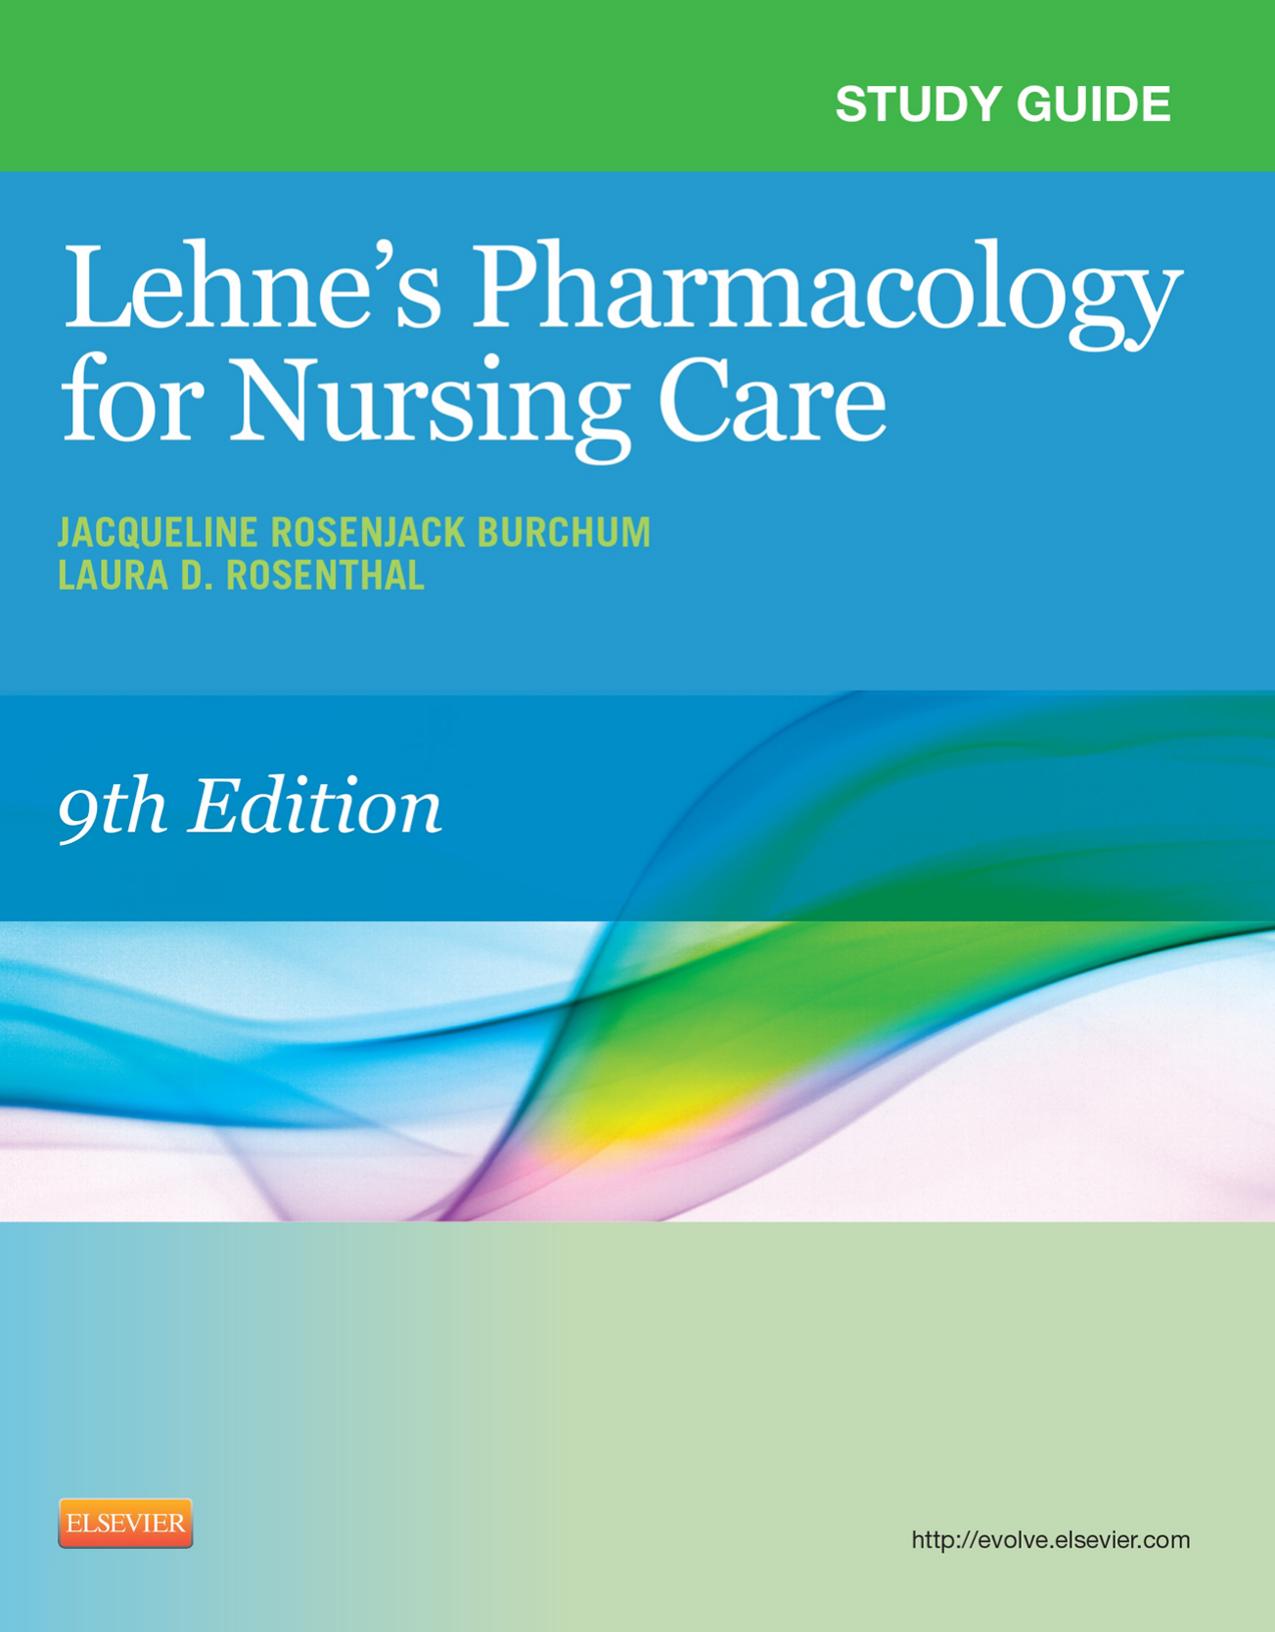 Study Guide Pharmacology for Nursing Care